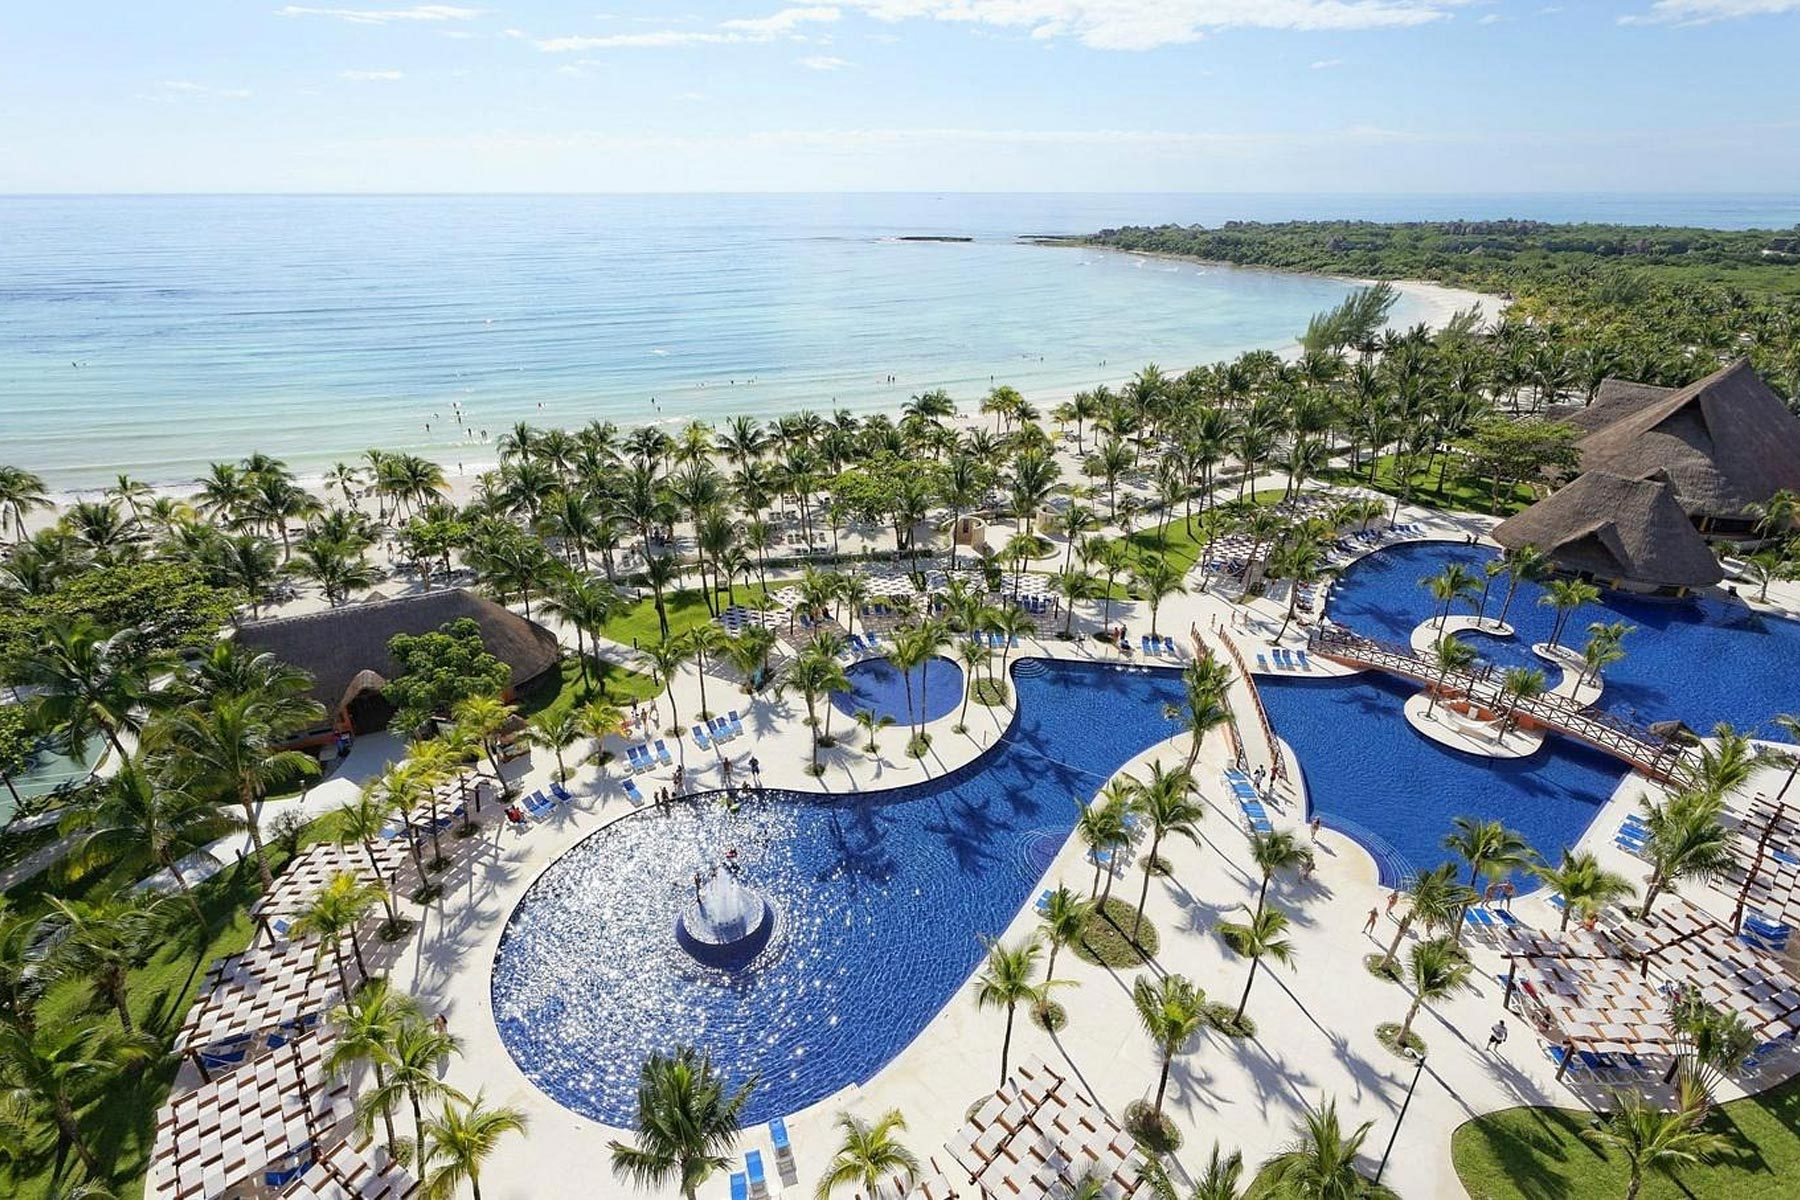 <h3 class=""><strong>Barceló Maya Beach</strong></h3> <p>Part of the Barceló Maya Grand Resort complex, <a href="https://www.tripadvisor.com/Hotel_Review-g153510-d254937-Reviews-Barcelo_Maya_Beach-Puerto_Aventuras_Yucatan_Peninsula.html" rel="noopener noreferrer">Barceló Maya Beach</a> is an <a href="https://www.rd.com/list/affordable-beachfront-hotels/" rel="noopener noreferrer">affordable beachfront hotel</a> located along a 1.25-mile-long stretch of sand in the heart of the Riviera Maya. Those who book the all-inclusive rate can enjoy meals and snacks at three on-site restaurants and drinks at the three on-site bars. Entertainment options abound, and guests also have access to facilities and amenities at the other properties within the complex. This means you'll pretty much never have to fight for a seat by the pool, a personal pet peeve of mine—and one that's all too common in popular beach destinations like Riviera Maya. Guests can also enjoy access to the kid-centric Barcy Water Park (Pirates Island Water Park access is also available, albeit at an extra cost).</p> <p>The true star of the show here, in my opinion, is the sprawling U-Spa Wellness and Fitness Center. While not directly on-property (it's next door at Barceló Maya Beach), it's the perfect place to retreat to should you need a break from the beach—or perhaps even from your own family (speaking from experience here!). The hot stone massage definitely doesn't disappoint, but if that's not your thing, you can take your pick of dozens of other offerings, including facials, body wraps and flotation therapy. Any treatment here is worth booking solely for the sumptuous spa amenities, most notably a restorative hydrotherapy circuit.</p> <p>Other highlights include a kids club, state-of-the-art sports facilities (think: basketball, tennis, mini golf, volleyball, giant chess, pool and ping-pong) and two escape rooms (for an extra charge). Those craving more adventure can take advantage of complimentary non-motorized water sports, like snorkeling, kayaking, windsurfing and taking out a Hobie Wave or water tricycle; however, most require reservations in advance.</p> <p><strong>Pros:</strong></p> <ul> <li class="">Choice between standard and all-inclusive rates, the latter of which is available for as low as $200 per night</li> <li class="">Beautiful beachfront location</li> <li class="">Access to services and facilities found throughout the Barceló Maya Grand Resort complex</li> </ul> <p><strong>Con</strong><strong>:</strong></p> <ul> <li class="">The resort has been only partially remodeled, so while all the rooms are comfortable, some are dated</li> </ul> <p class="listicle-page__cta-button-shop"><a class="shop-btn" href="https://www.tripadvisor.com/Hotel_Review-g153510-d254937-Reviews-Barcelo_Maya_Beach-Puerto_Aventuras_Yucatan_Peninsula.html">Book Now</a></p>